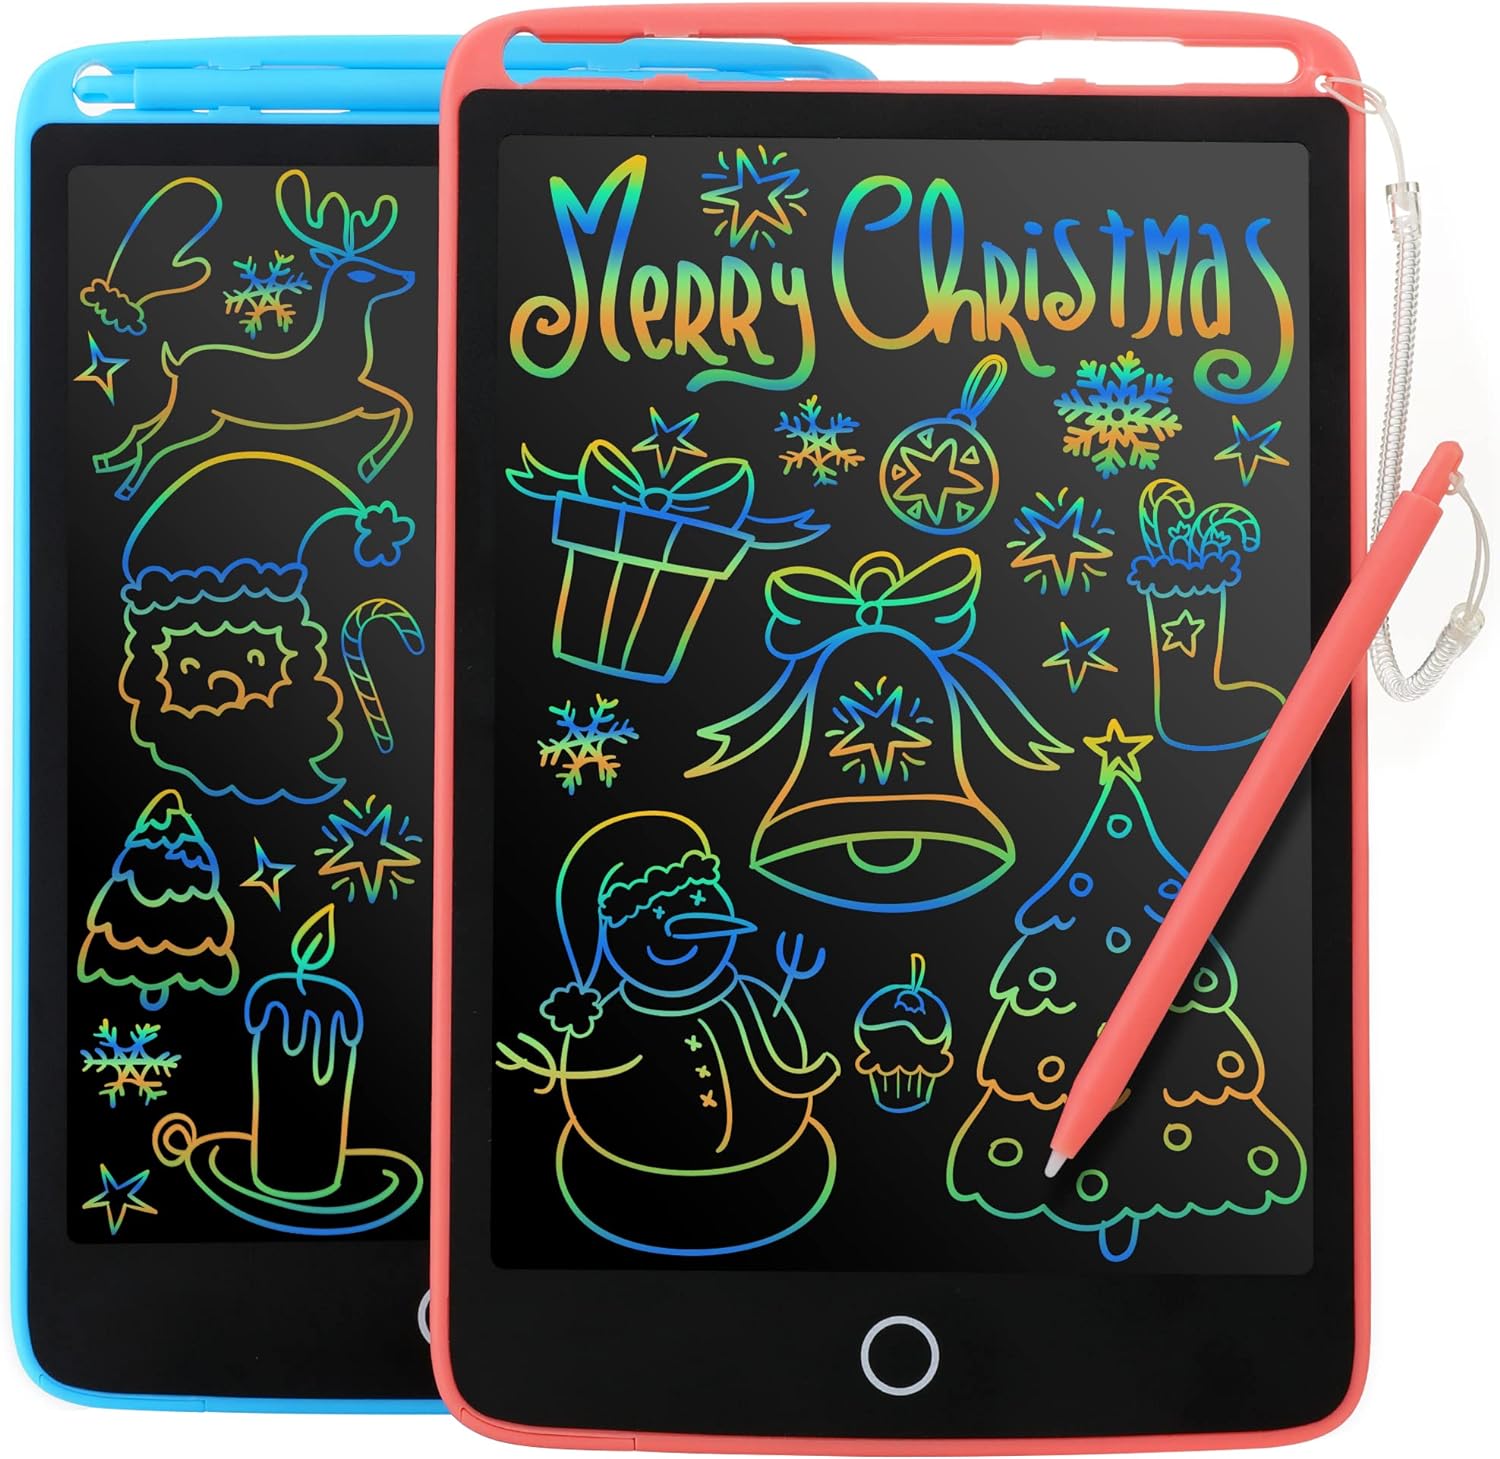 2 Pack LCD Writing Tablet for Kids, 8.5inch Doodle Writing Board Colorful Drawing Board, Kids Travel Games Activity Learning Educational Toy Gift for 3 4 5 6 7 8 Year Old Girls Boys Toddlers